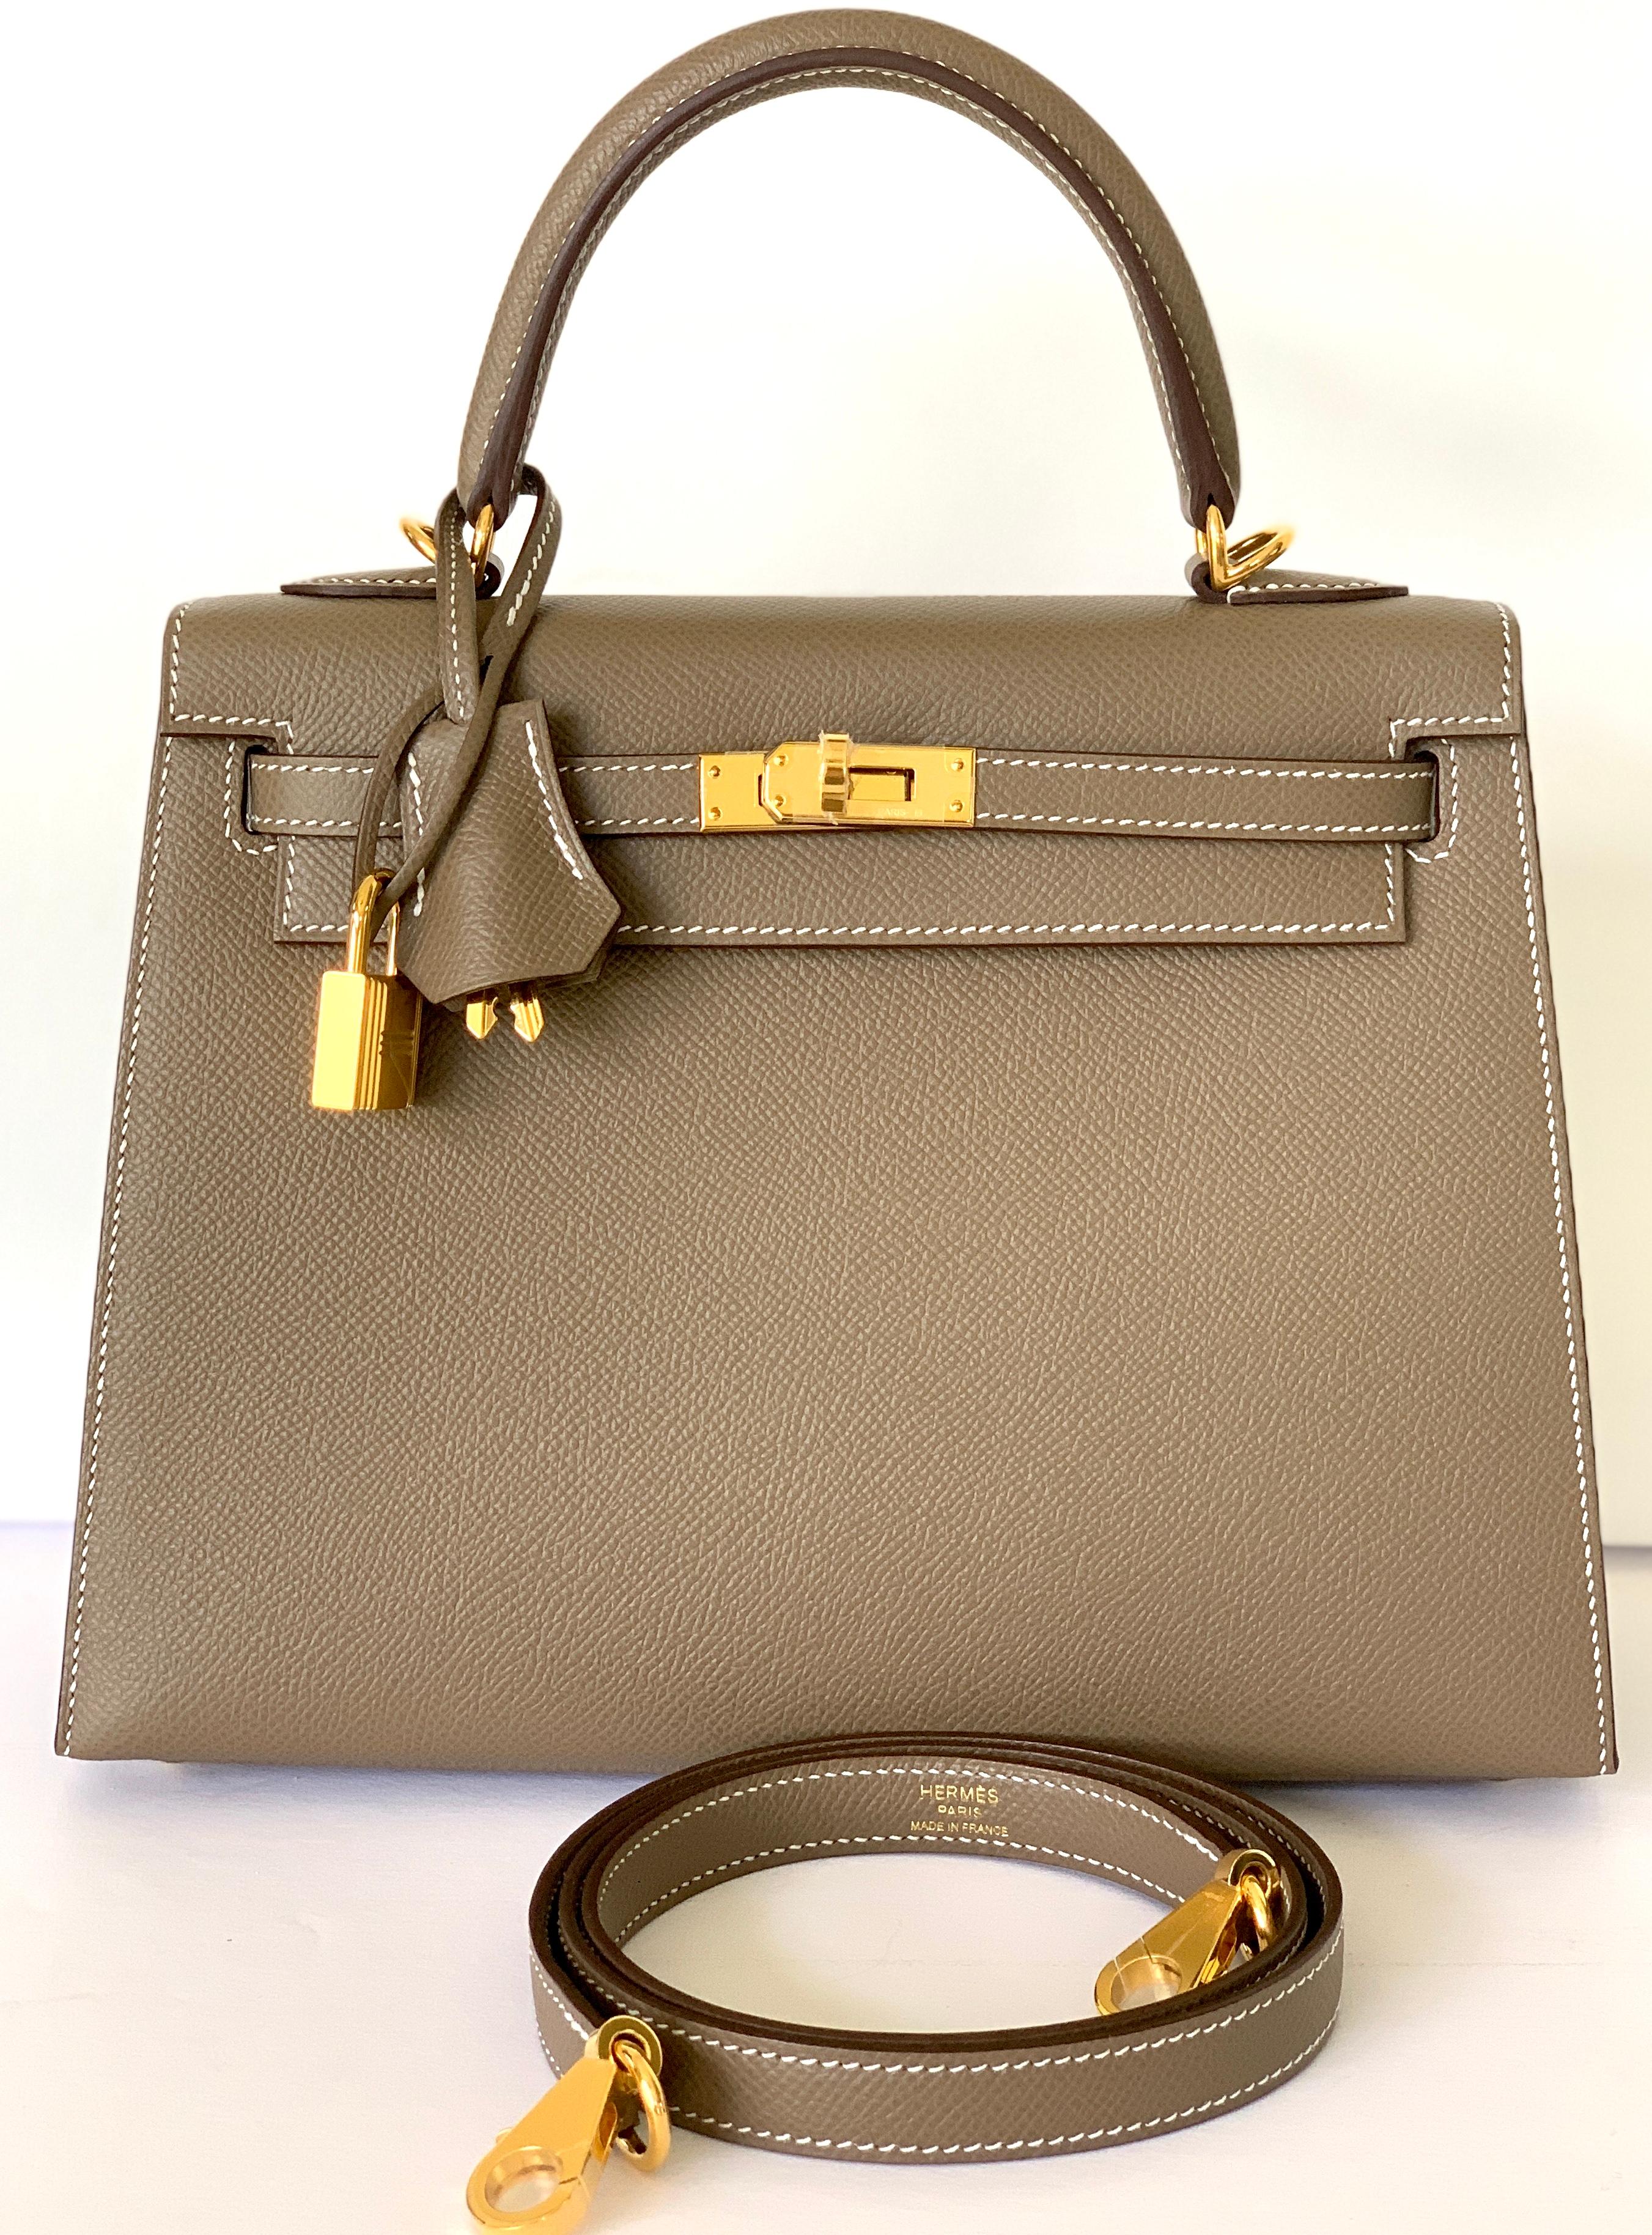 Hermes 25cm Kelly
Hermes Kelly 25cm
Etoupe one of the most coveted colors, sucha a great neutral for everyday
Never worn, plastic on the hardware including shoulder strap hardware
One of the hottest bags in the market right now
Etoupe Epsom in size